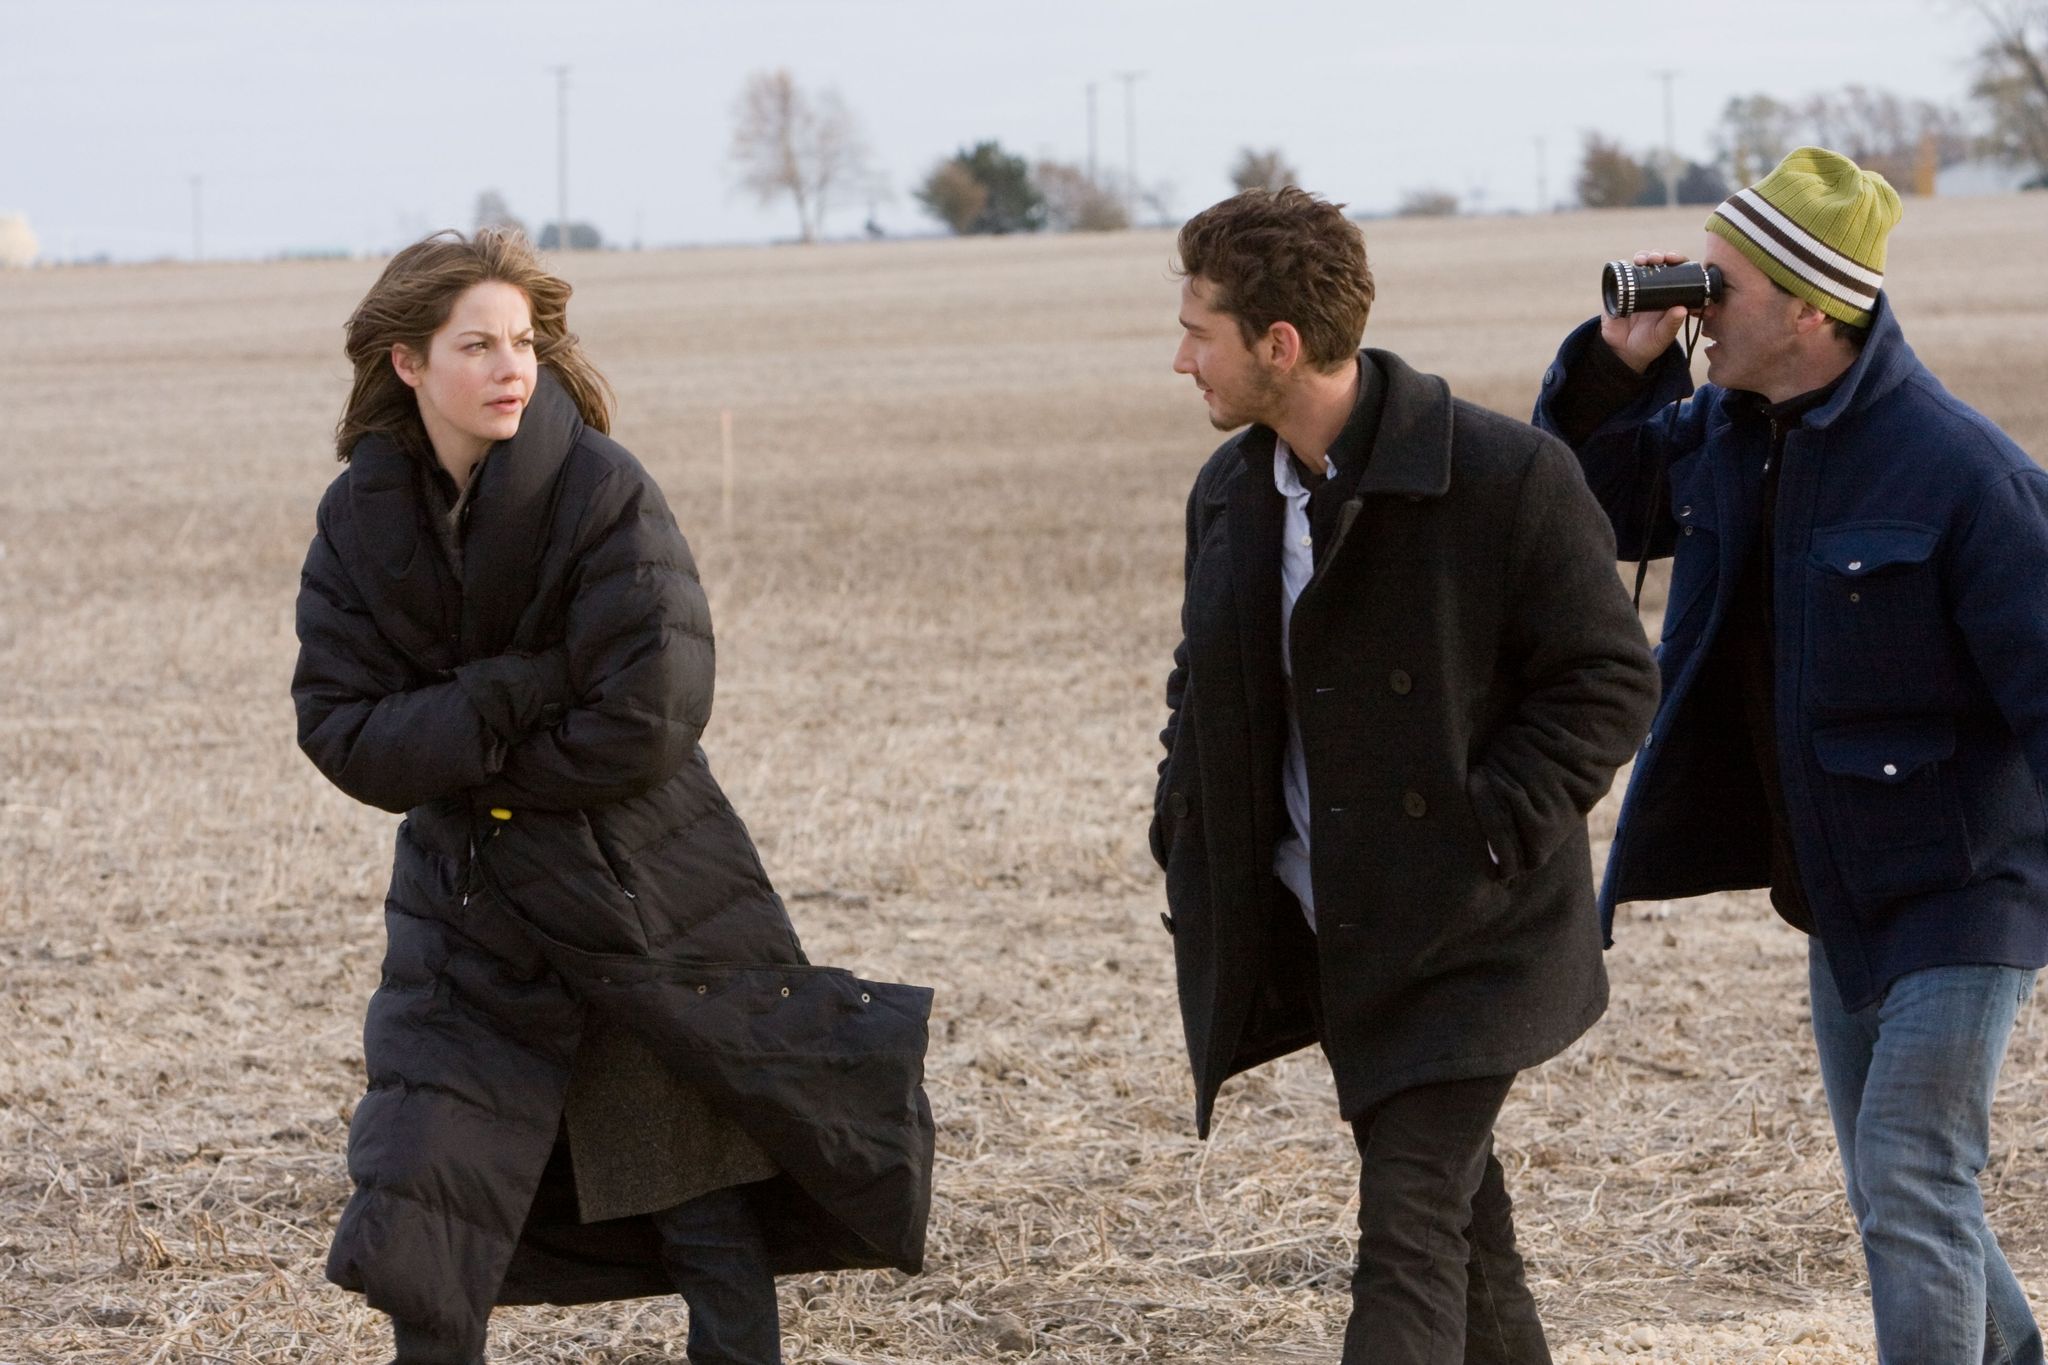 Still of D.J. Caruso, Shia LaBeouf and Michelle Monaghan in Eagle Eye (2008)